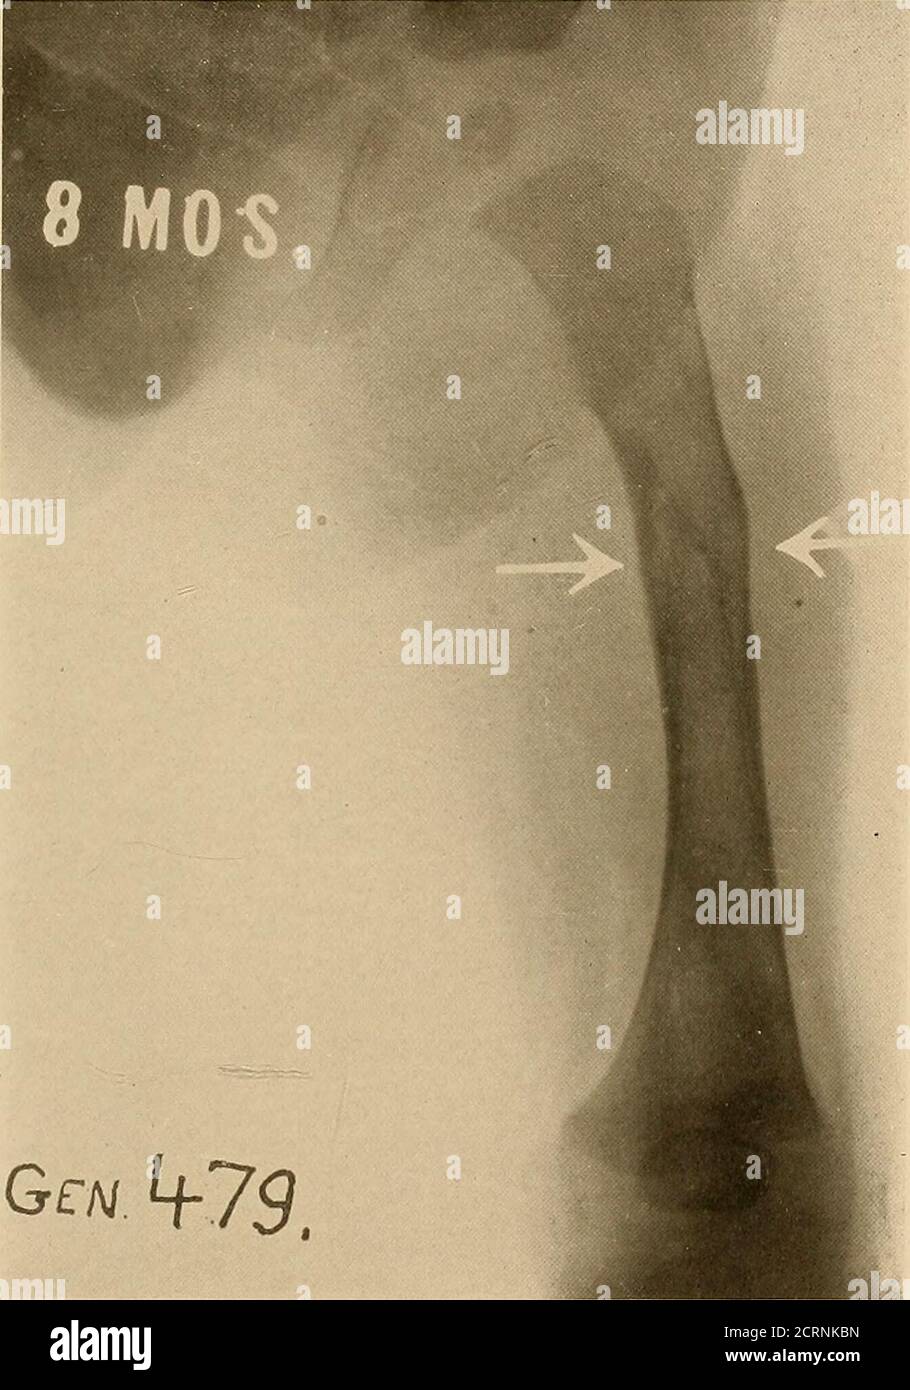 . Birth fractures and epiphyseal dislocations . Fig. 71.—Case 3. At the eighth month the anterior angular deformity hadbegun to assume the usual anterior curvature, characteristic of these frac-tures when the original anterior angulation has remained uncorrected.. Gf A/ ff 75. Fig. 72.—Case 3. The anterior view of the injured femur at the eighthmonth presented but slight abnormality. There was slight thickening, withoutward curvature, but the result from this point of view was satisfactory. 75 Stock Photo